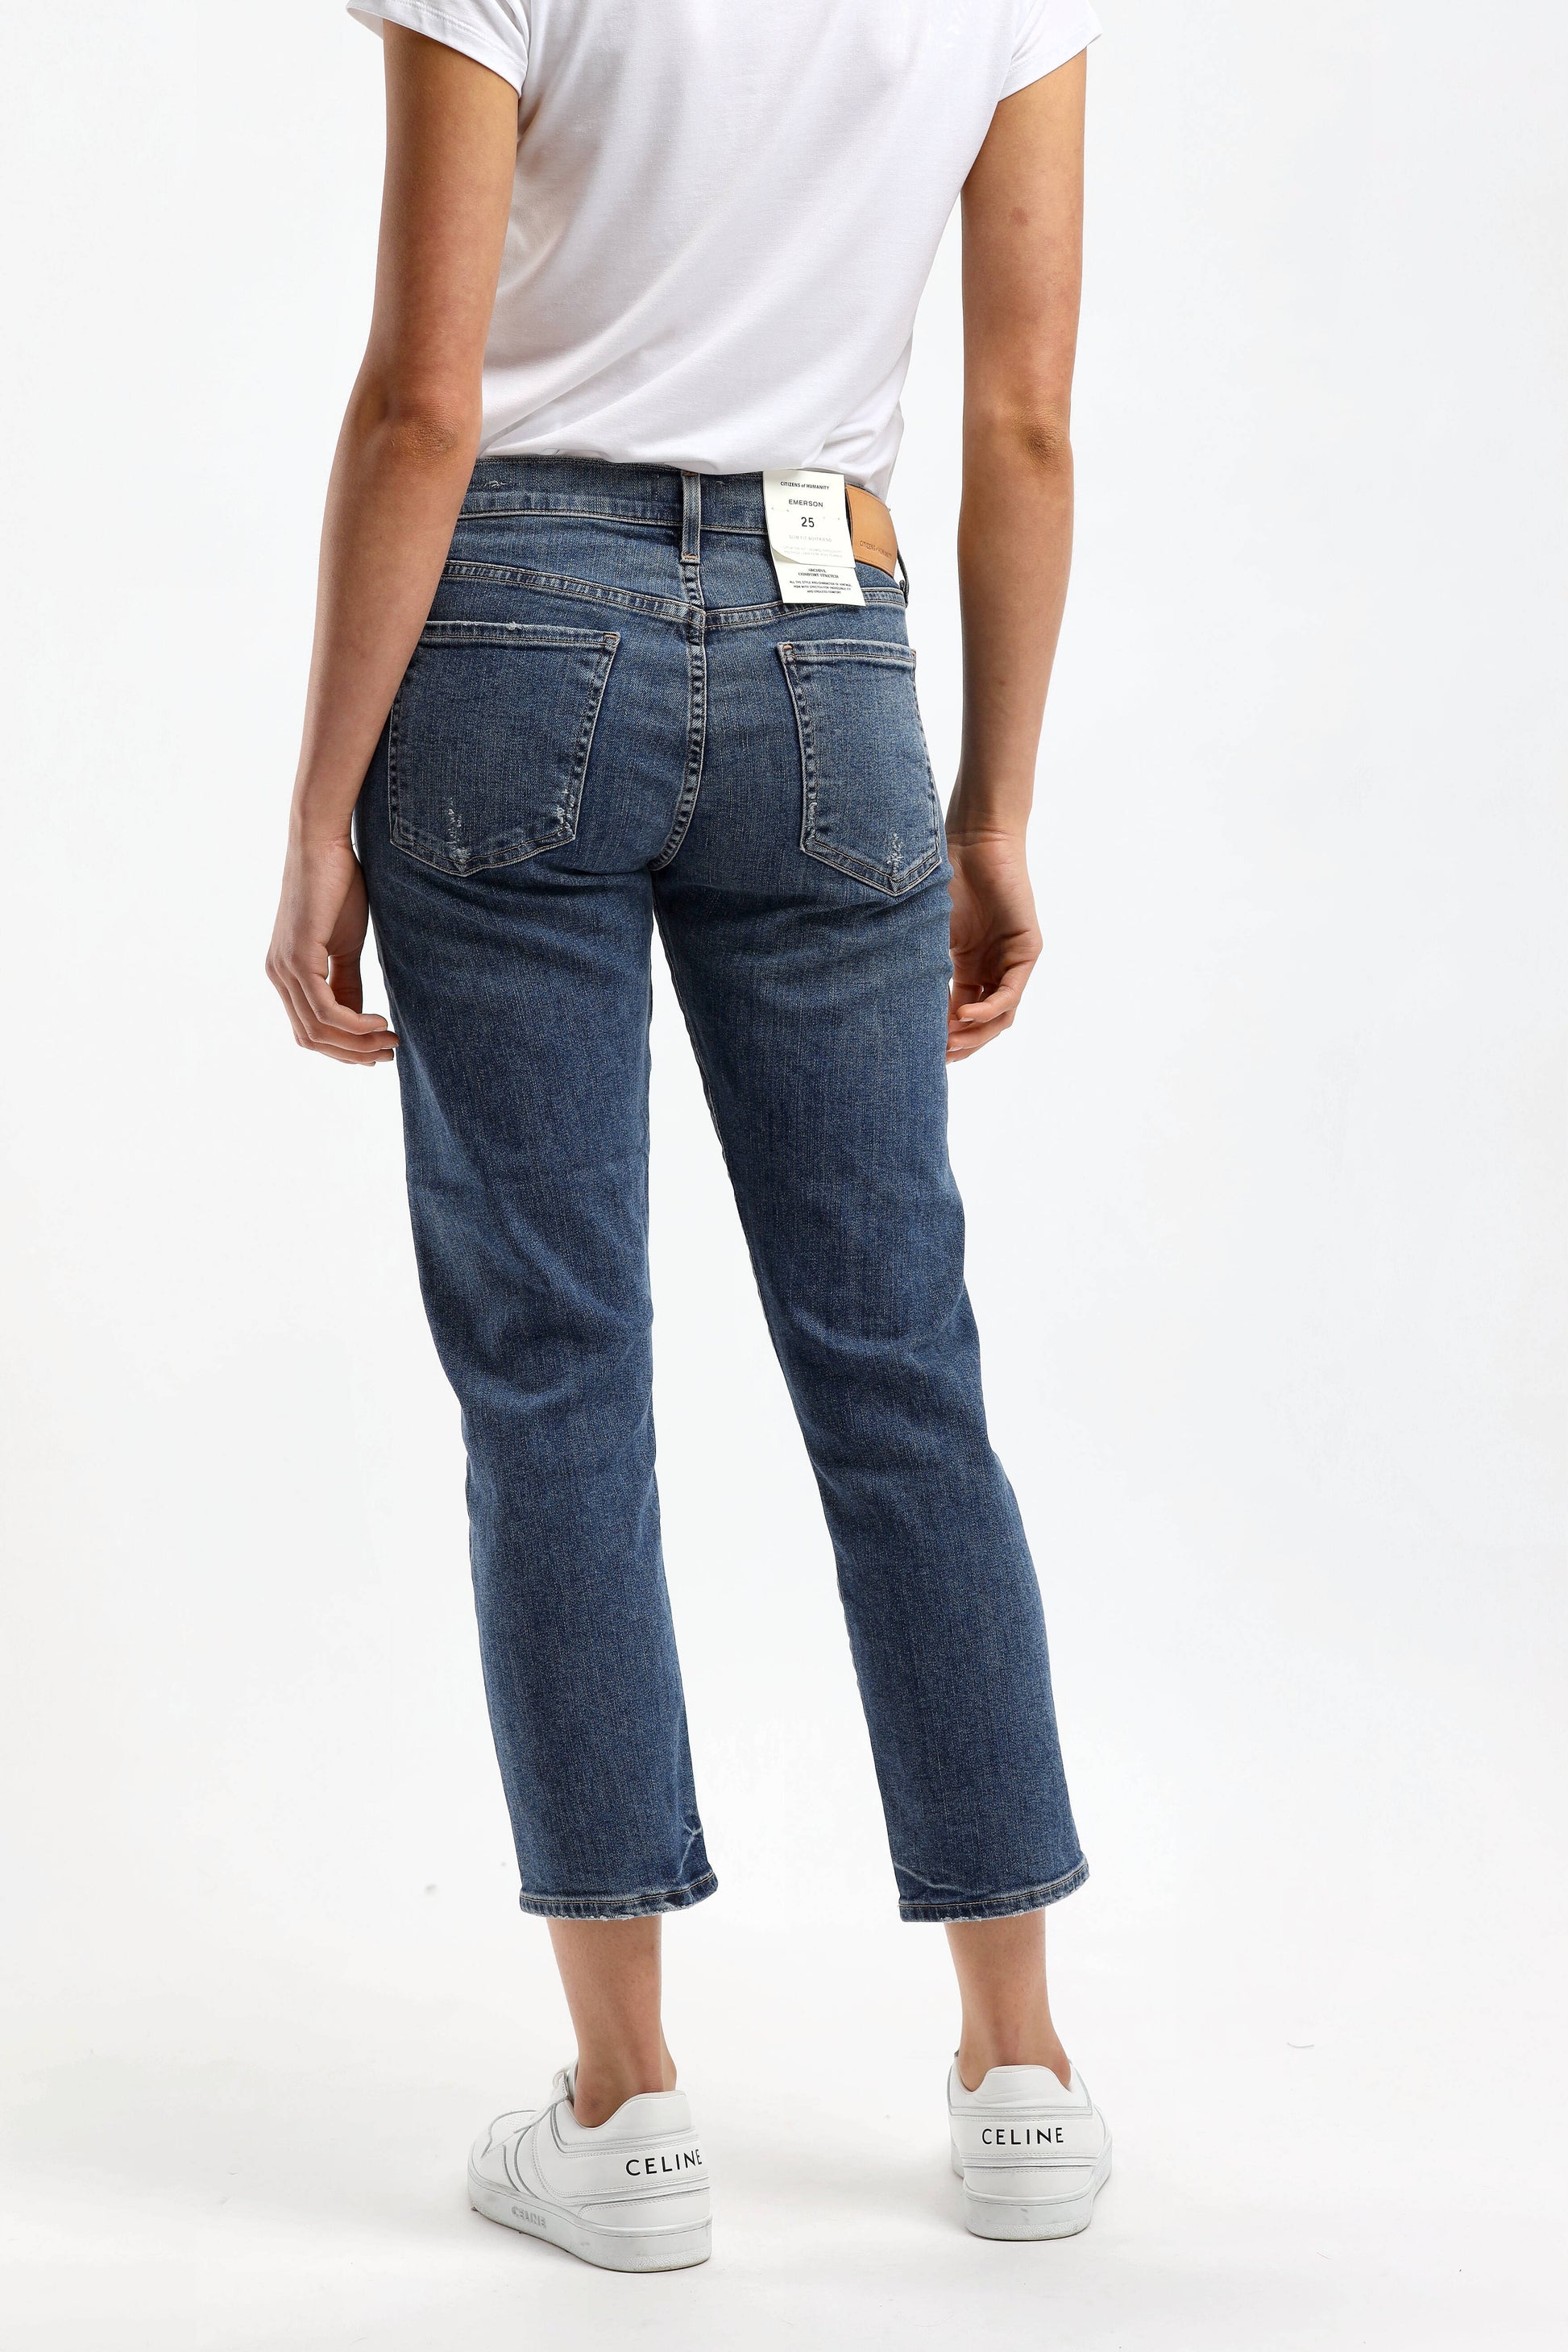 Jeans Emerson 27" in Long WeekendCitizens of Humanity - Anita Hass